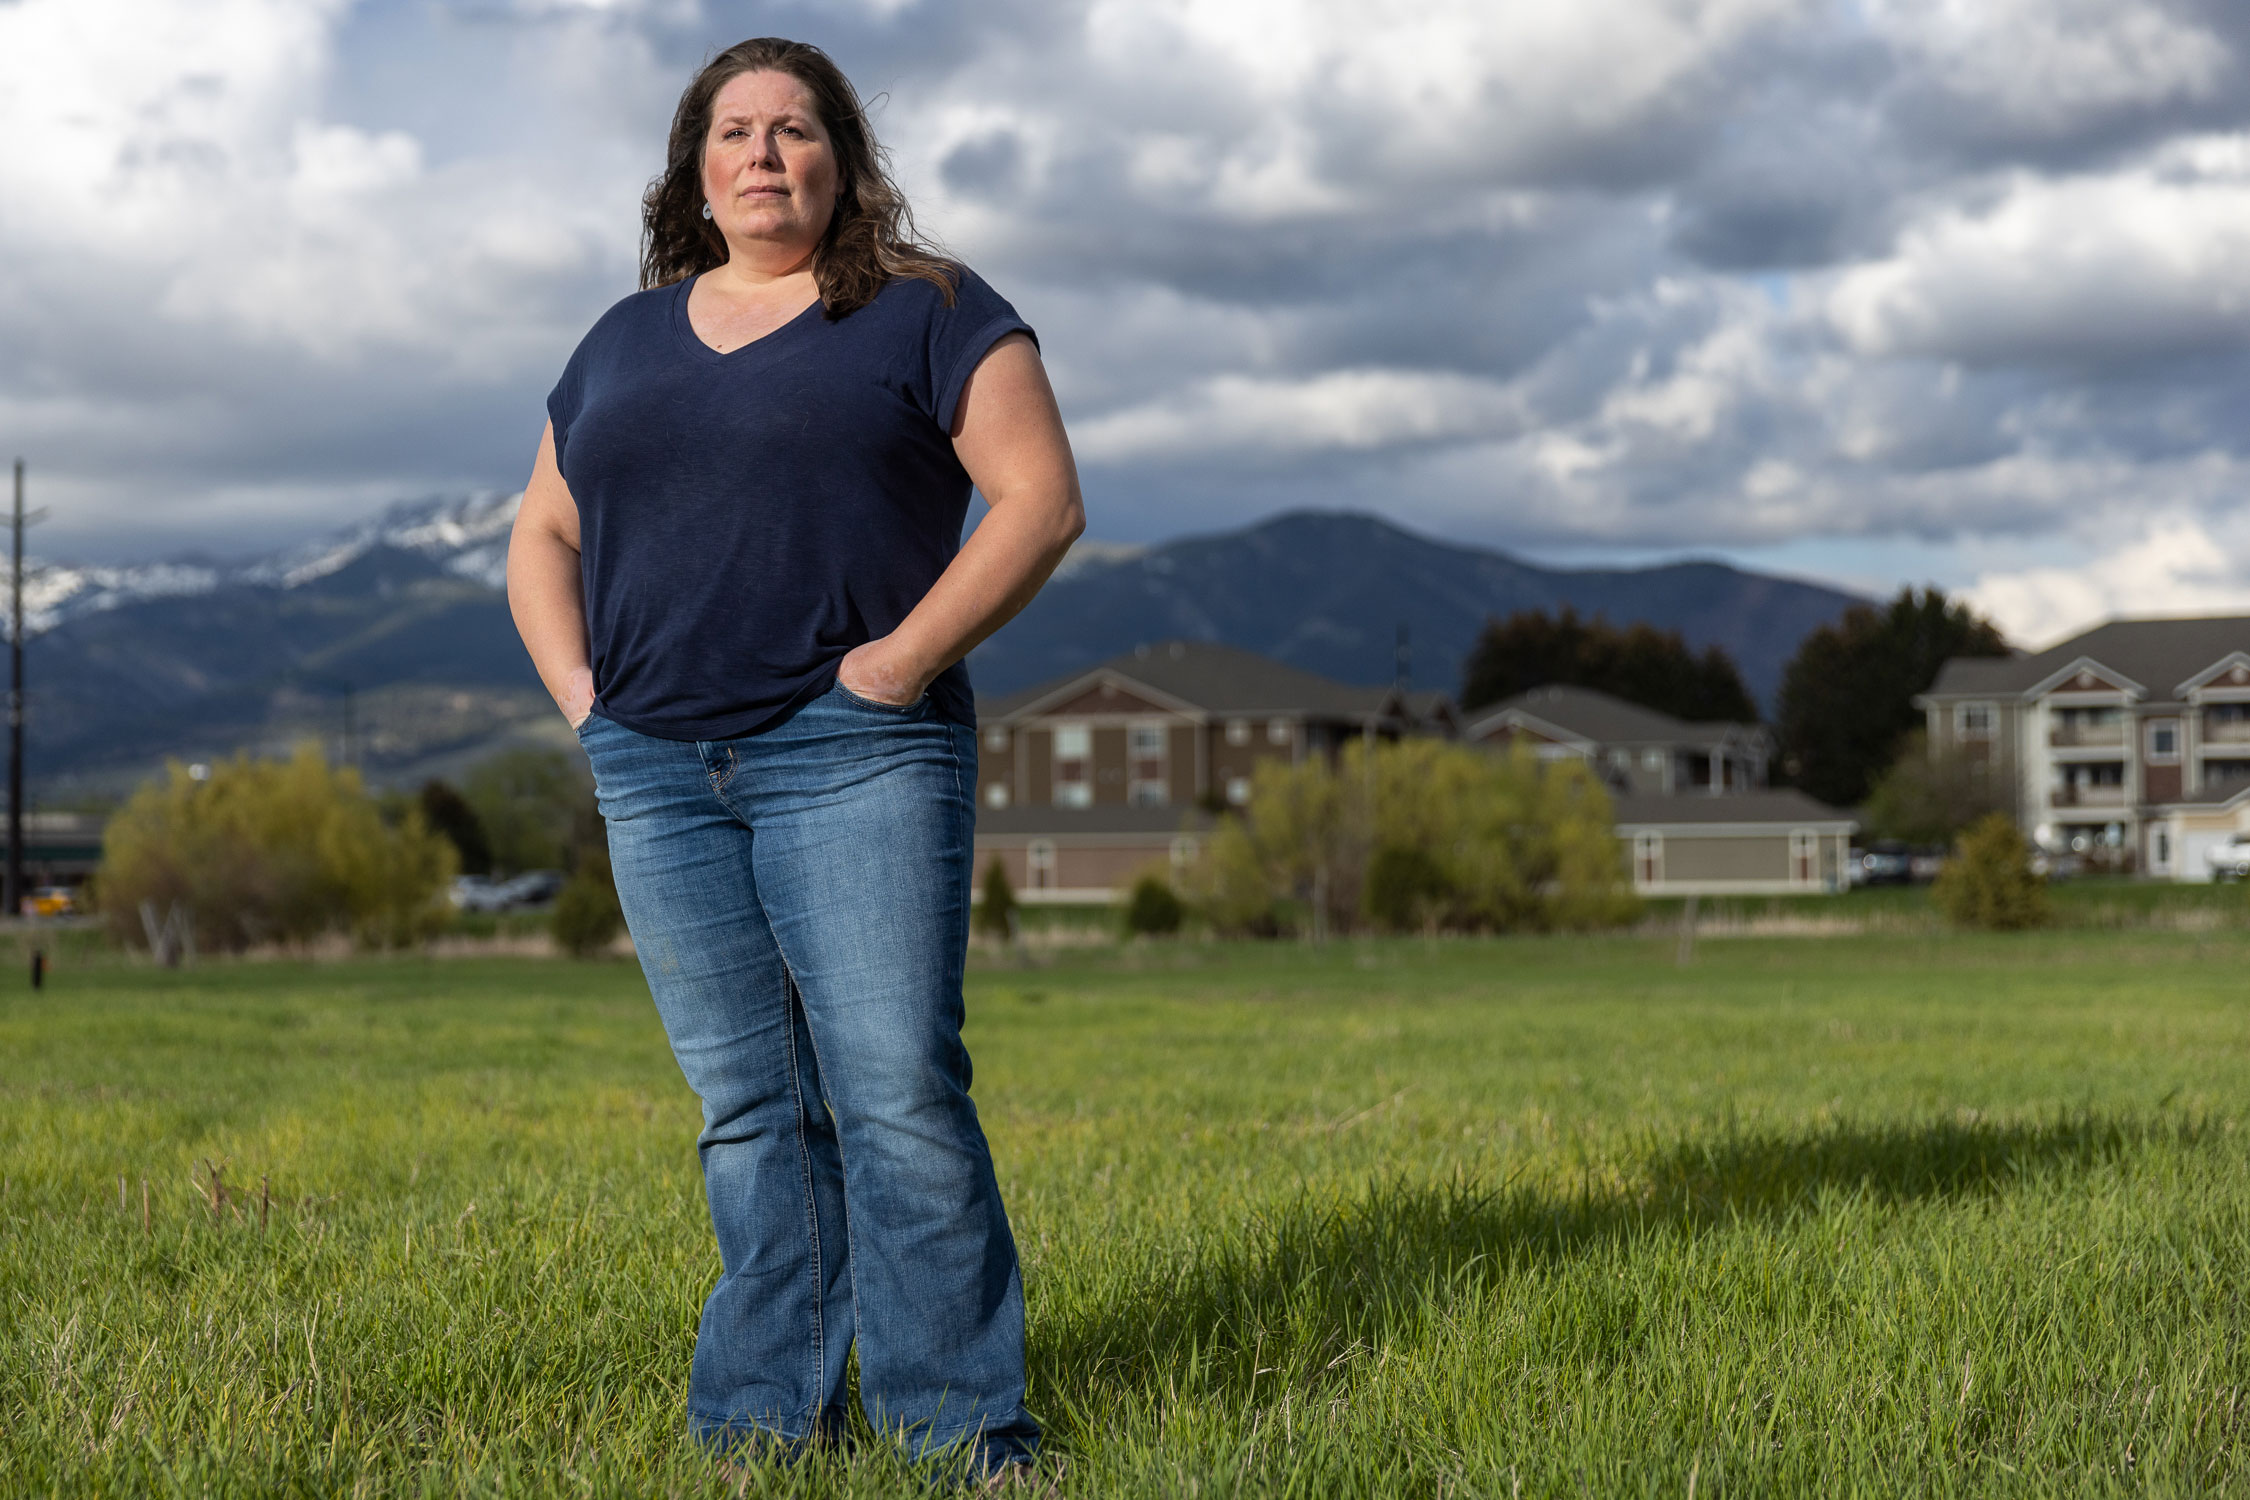 A woman in a dark blue t-shirt and jeans stands in a grassy field. There are buildings beyond the field and mountains farther in the distance.